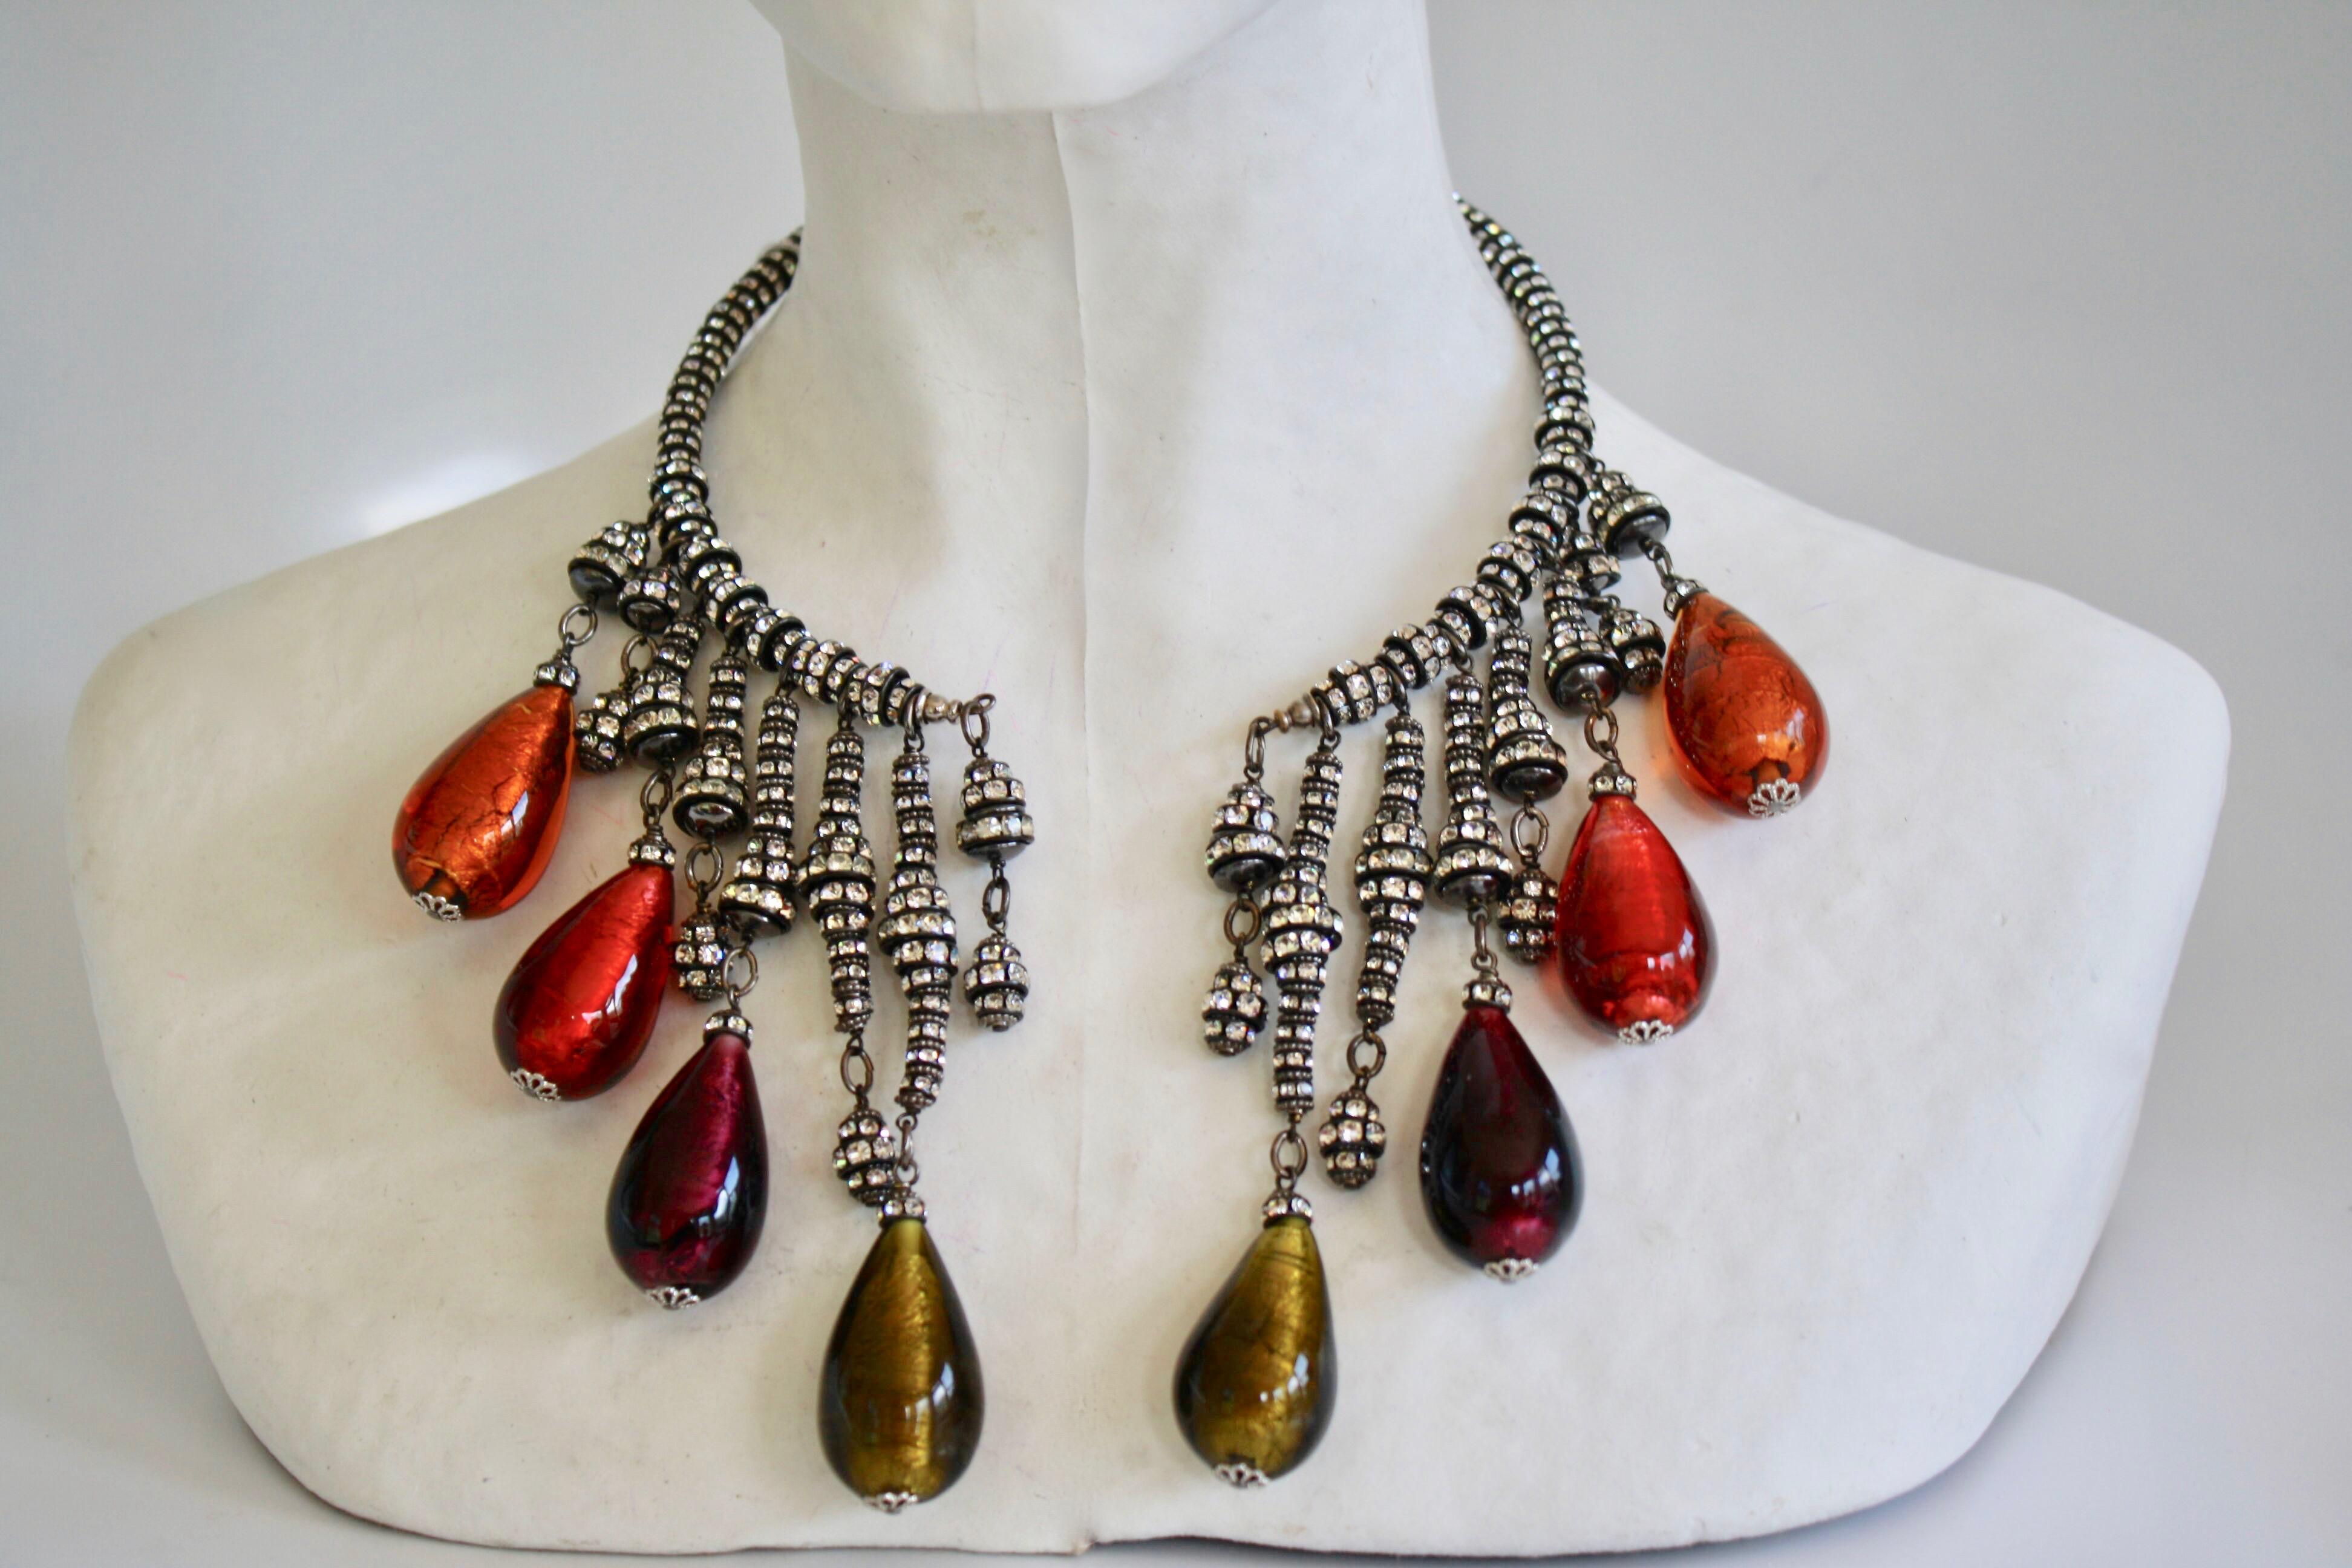 Phenomenal handmade necklace from Francoise Montague Paris. Comprised of Swarovski crystal rondelles on black metal with graduated multi color venetian glass drops. Opens to the front. 
13” around
longest drop is 4”